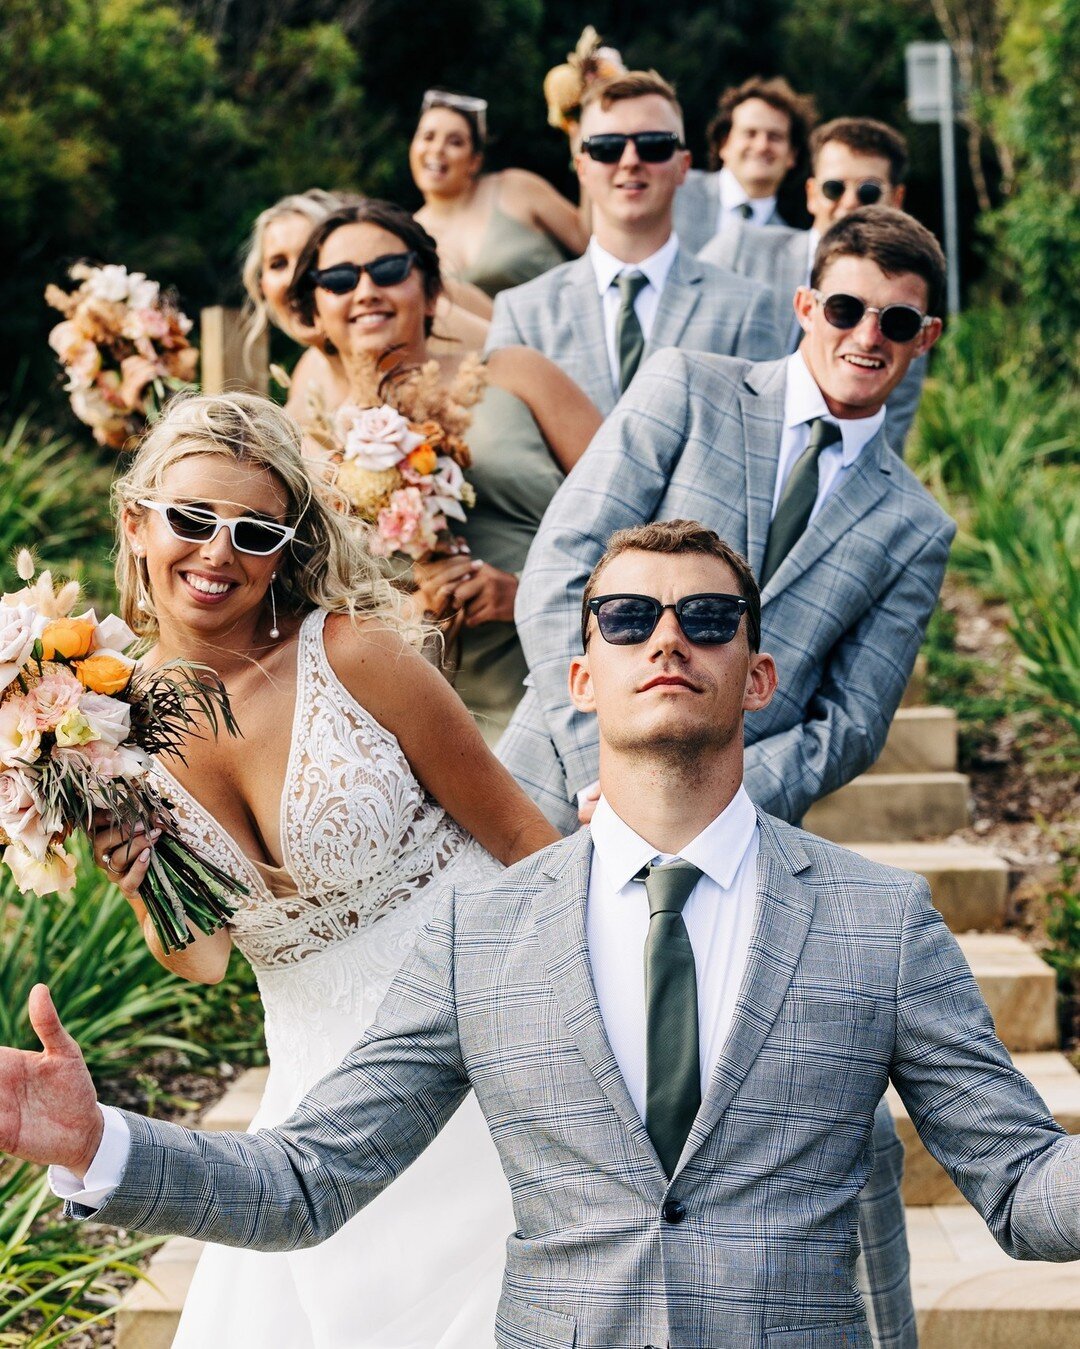 Here's our official request for every wedding party to use fun sunnies 🕶